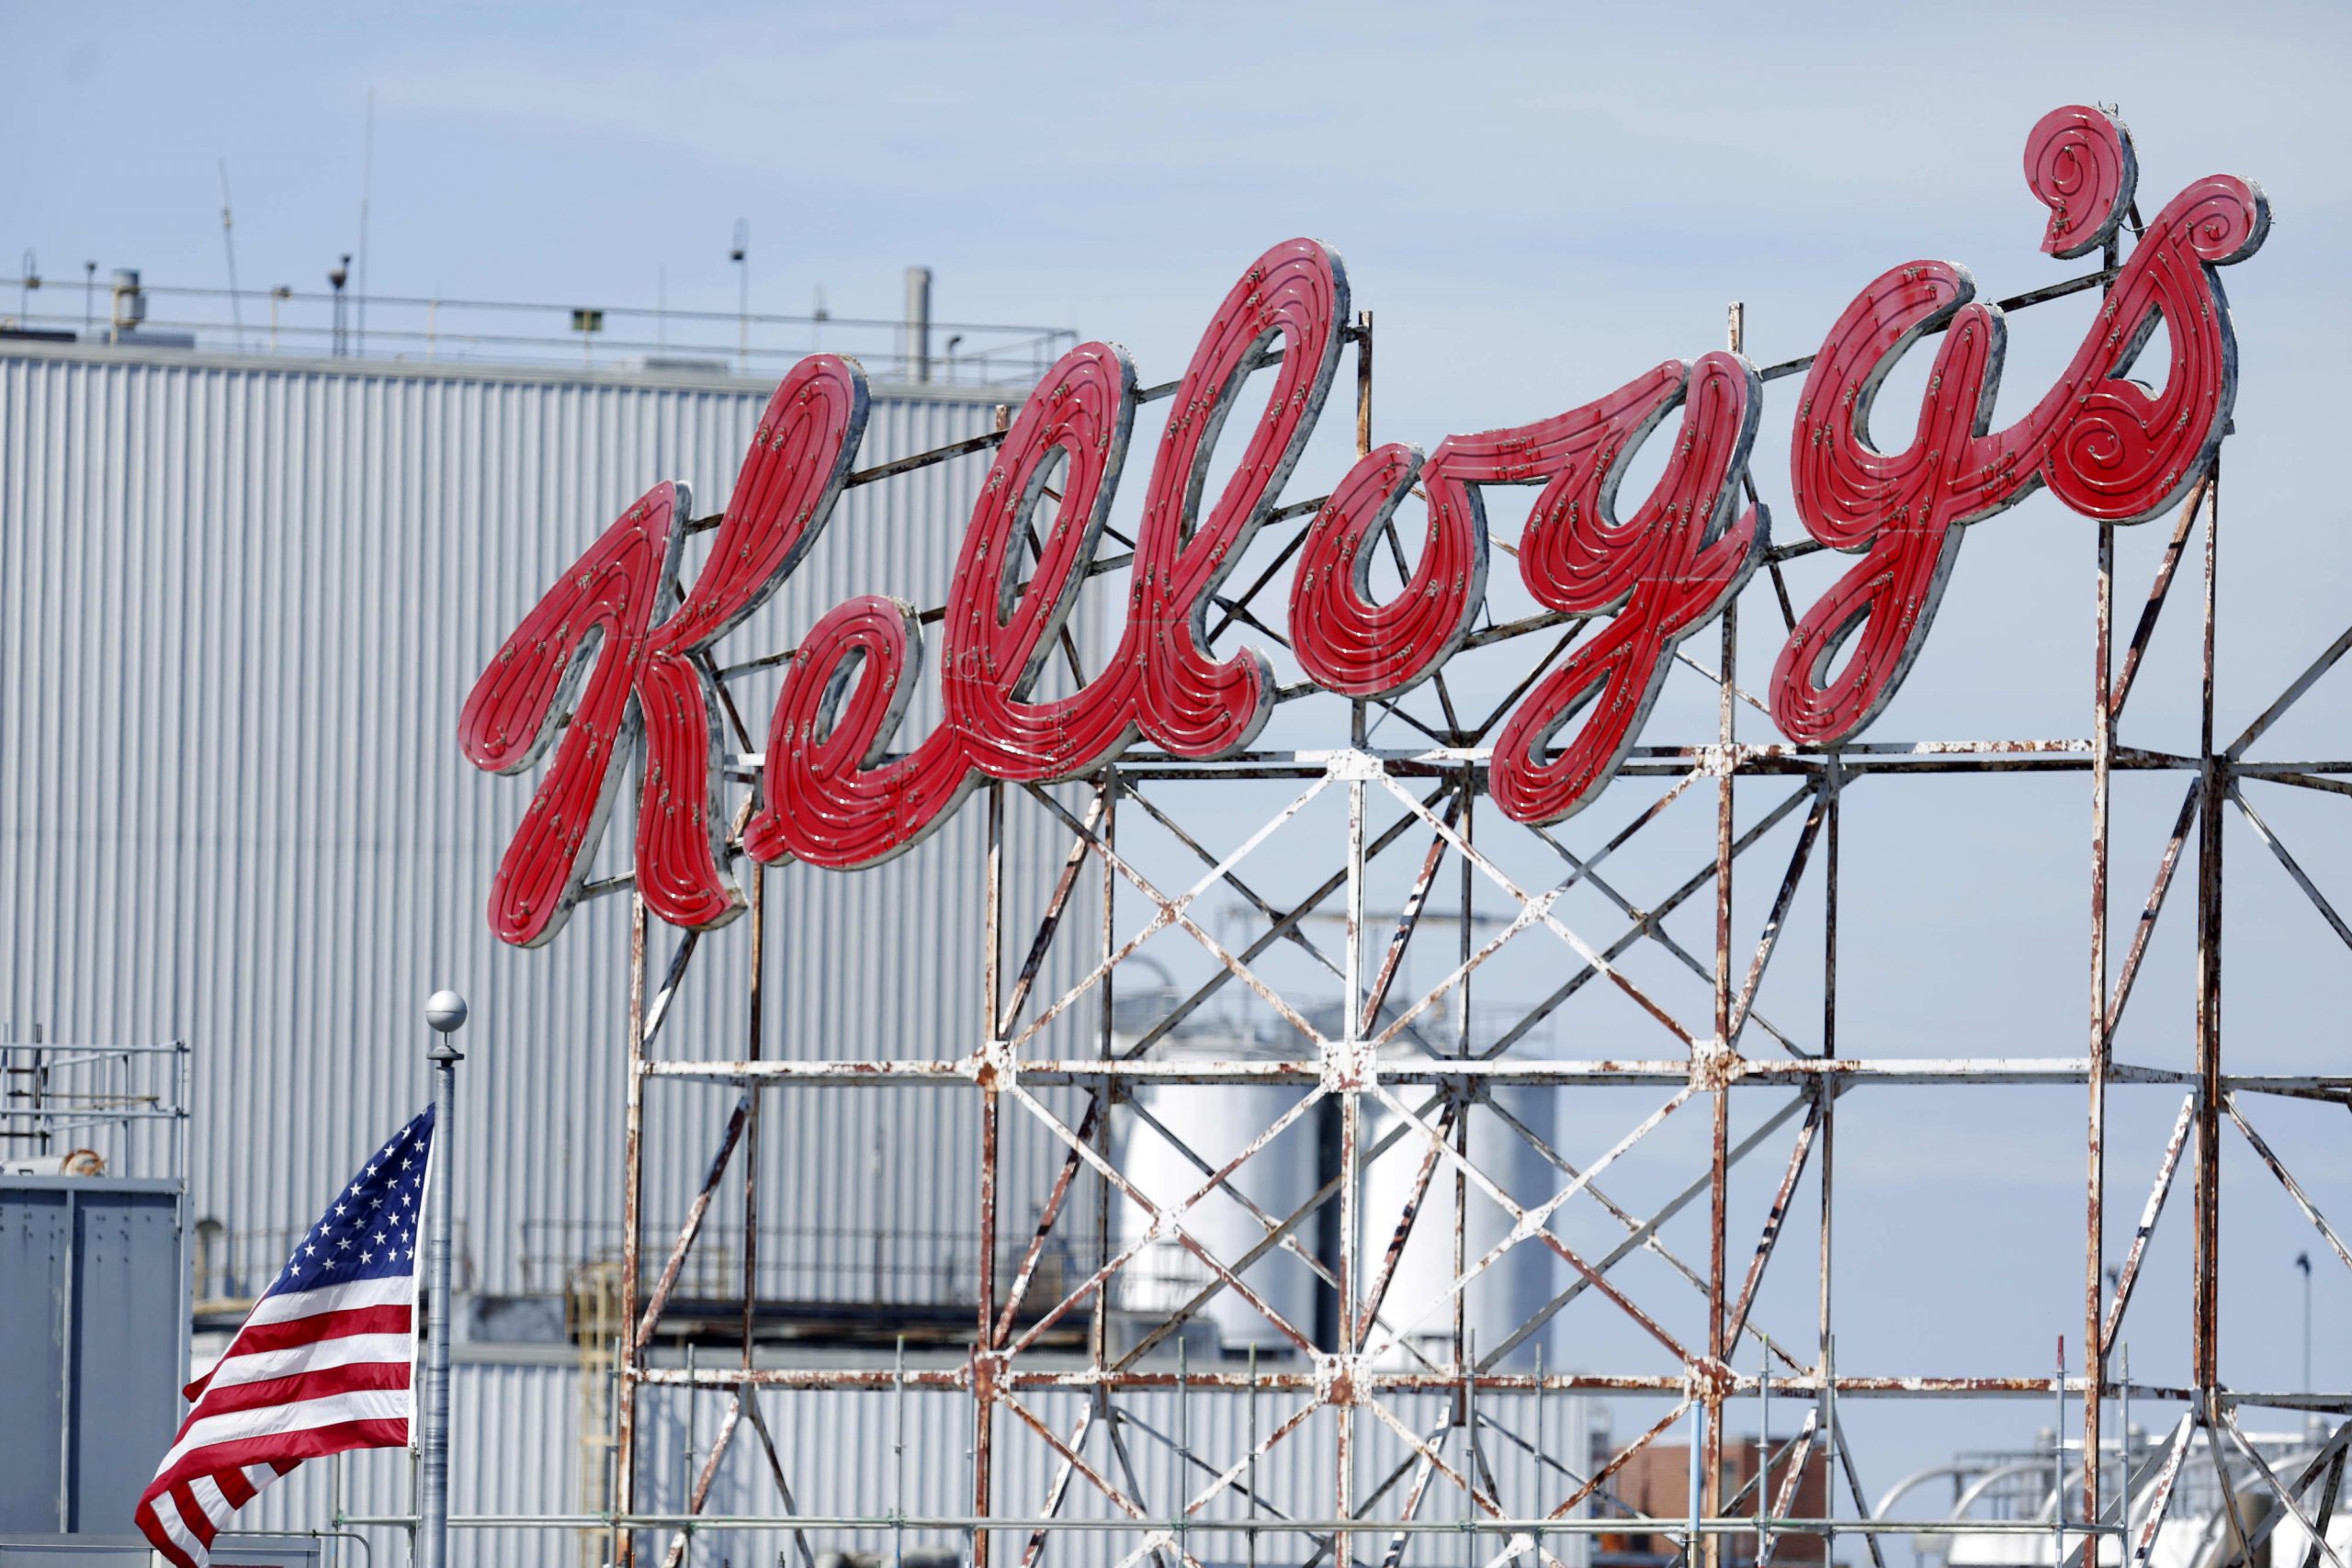 Kellogg may raise prices again in 2022 amid ‘double digit cost inflation,’ says CEO